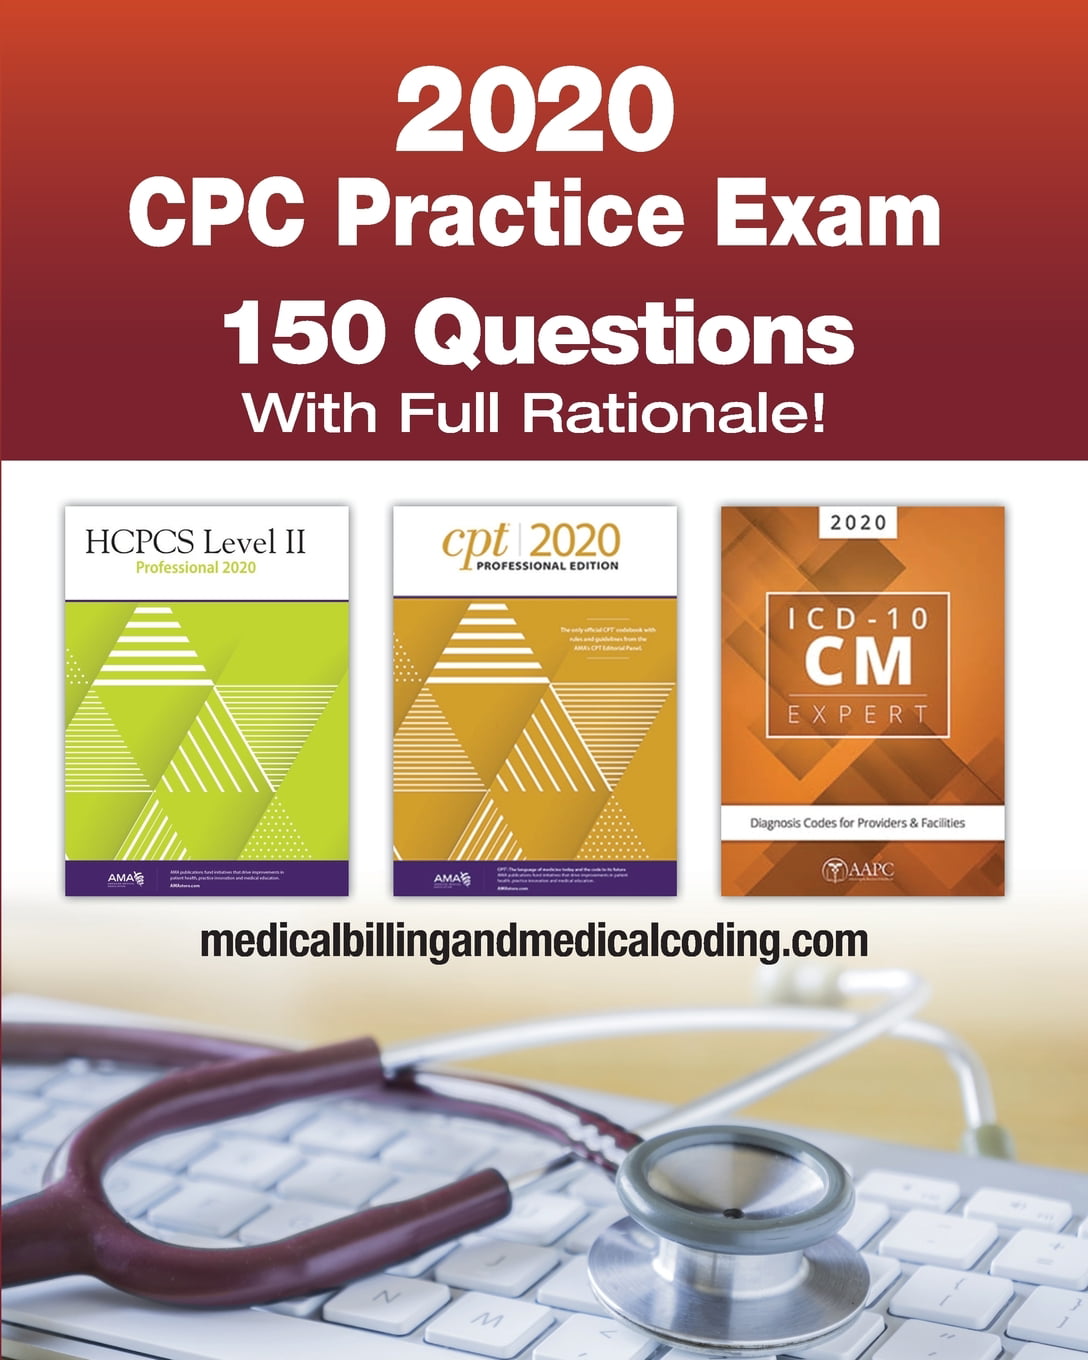 how much is cpc case study test